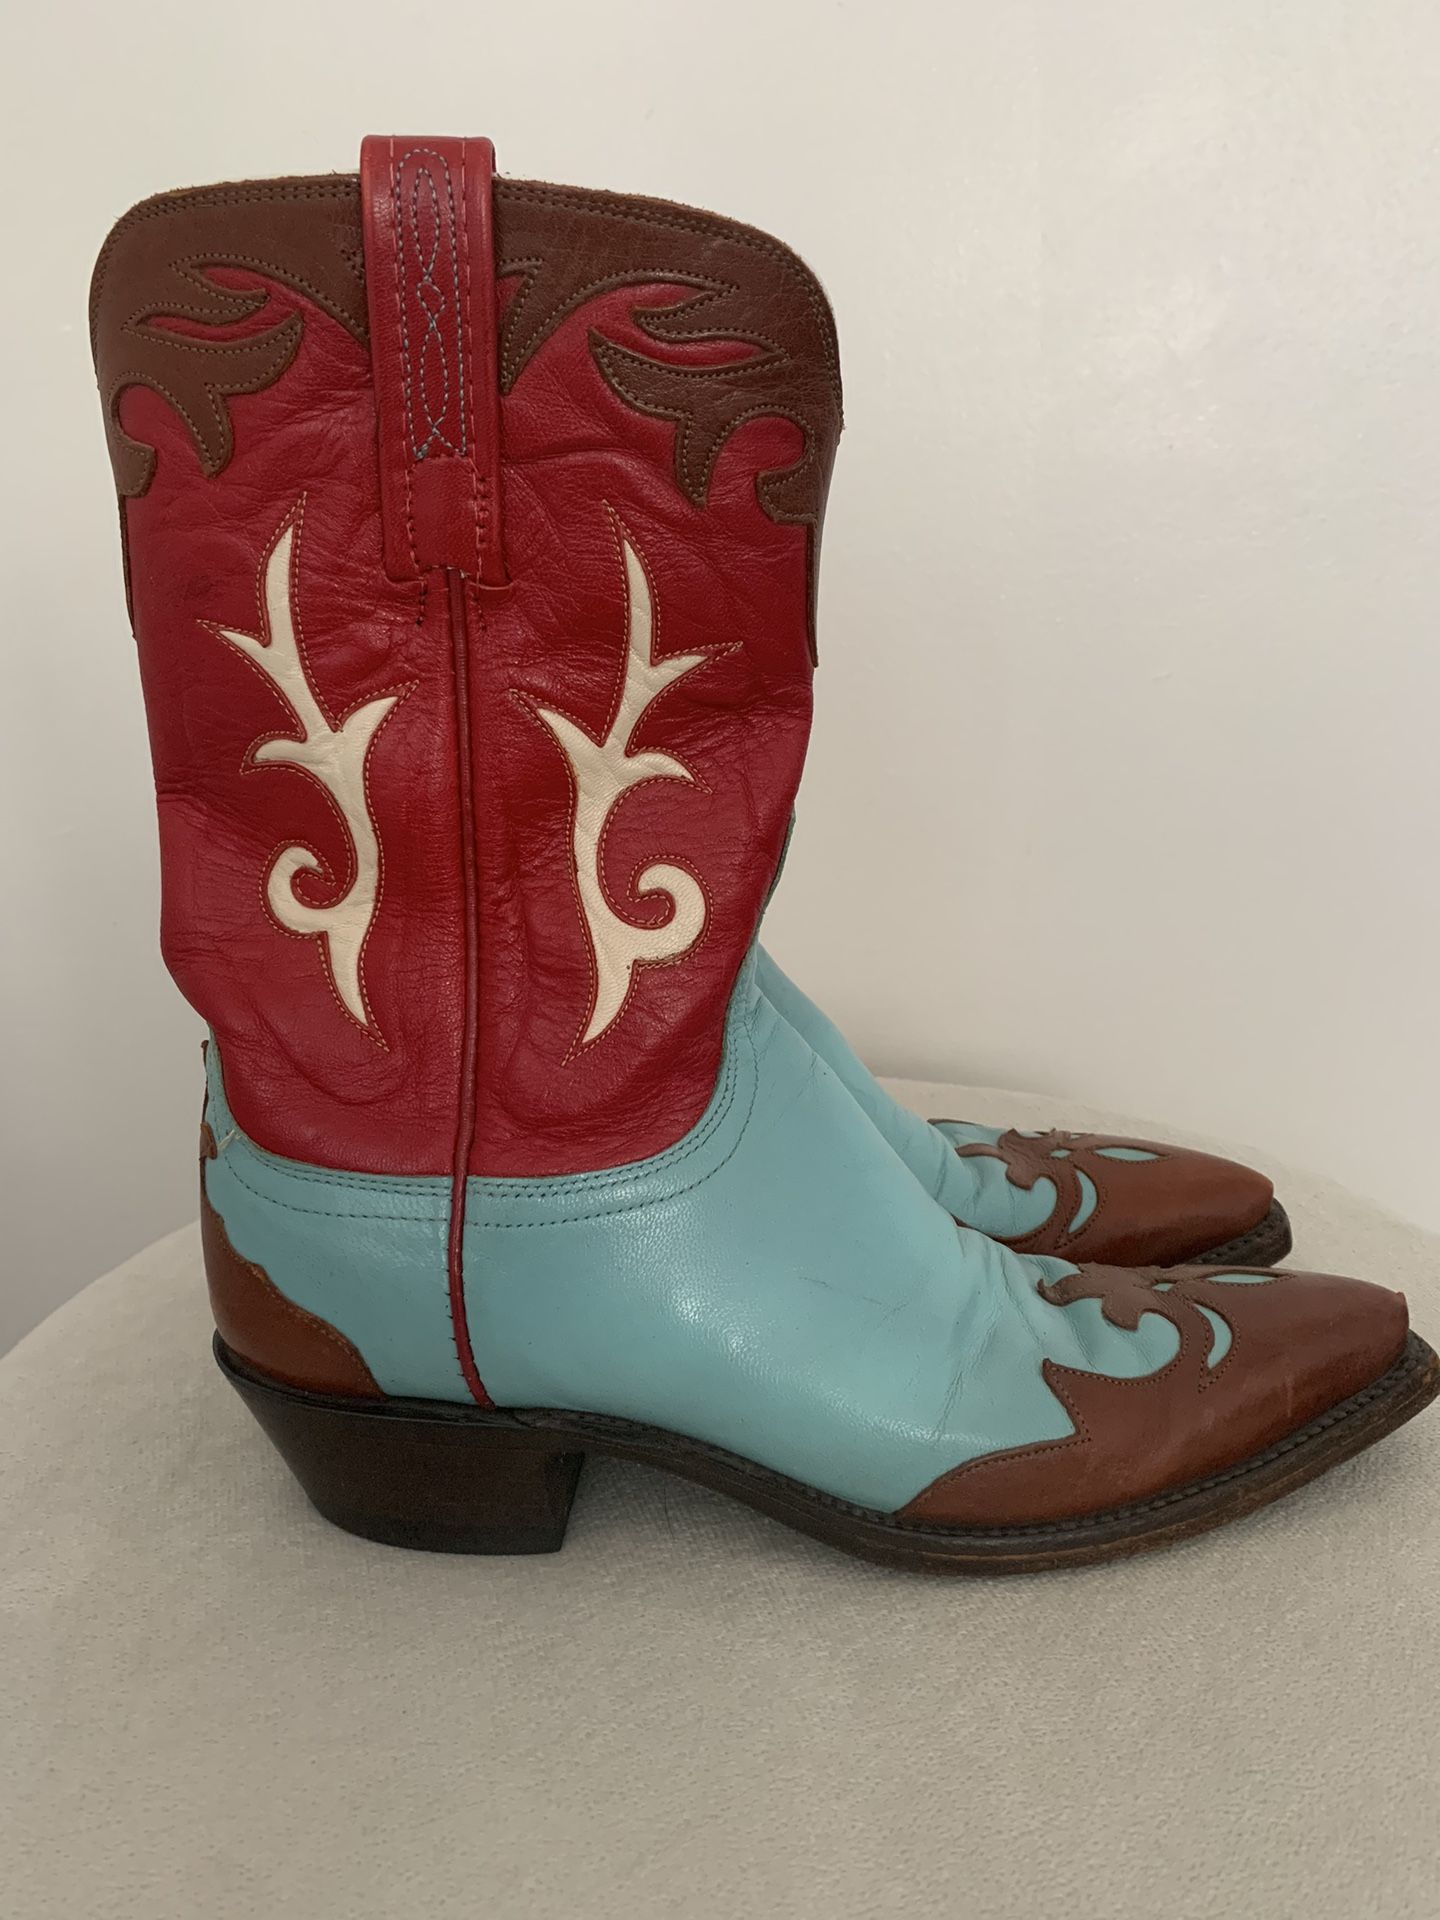 Beautiful Lucchese 1883 Women’s 7.5 Western Red Blue Cowboy Boots. Unique